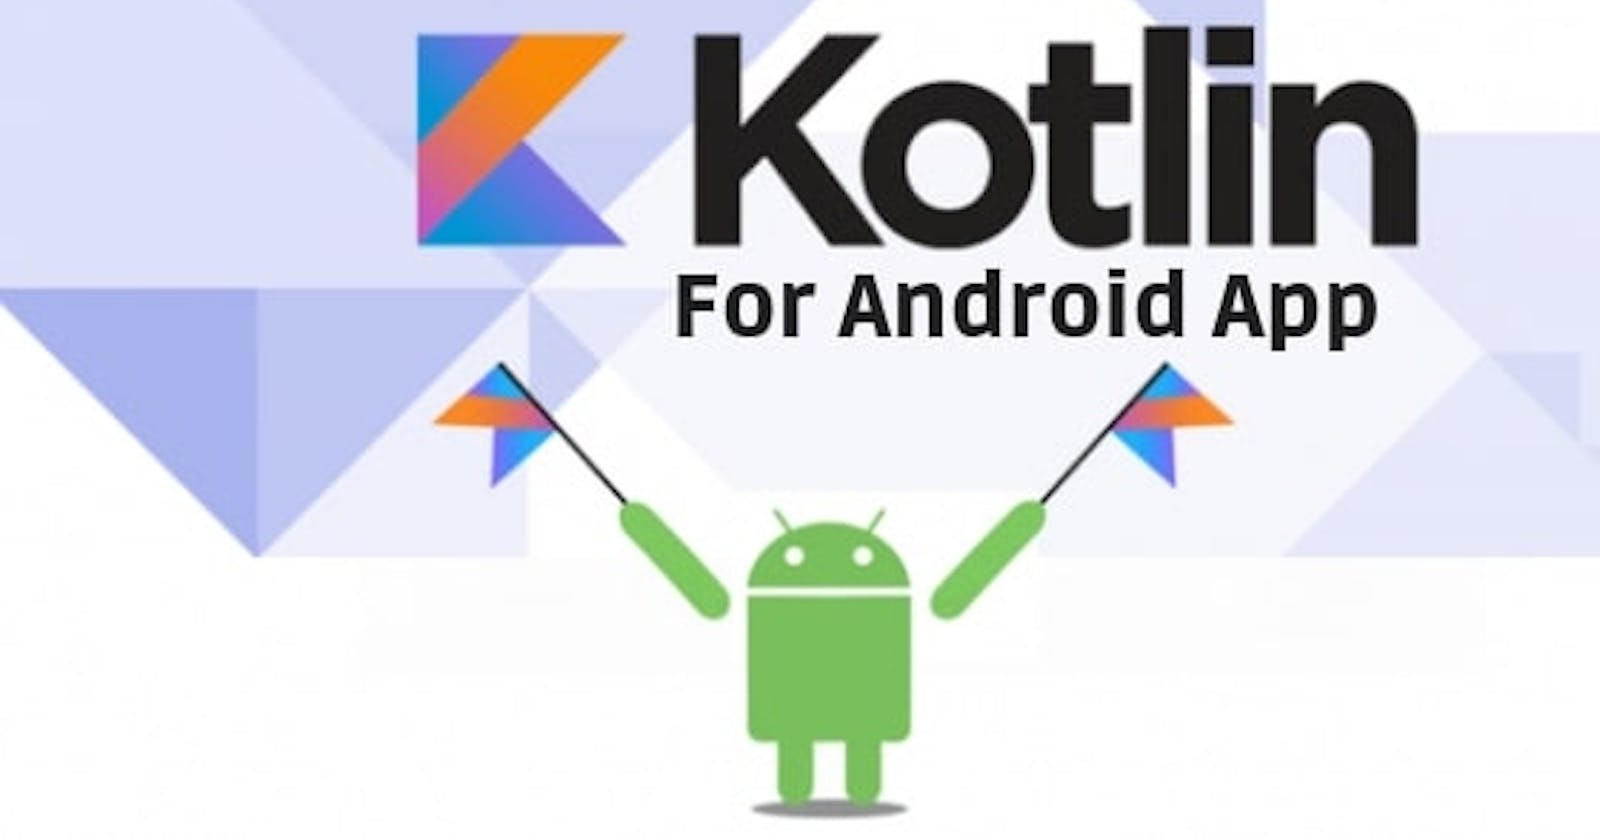 Get started with Kotlin for Android Development